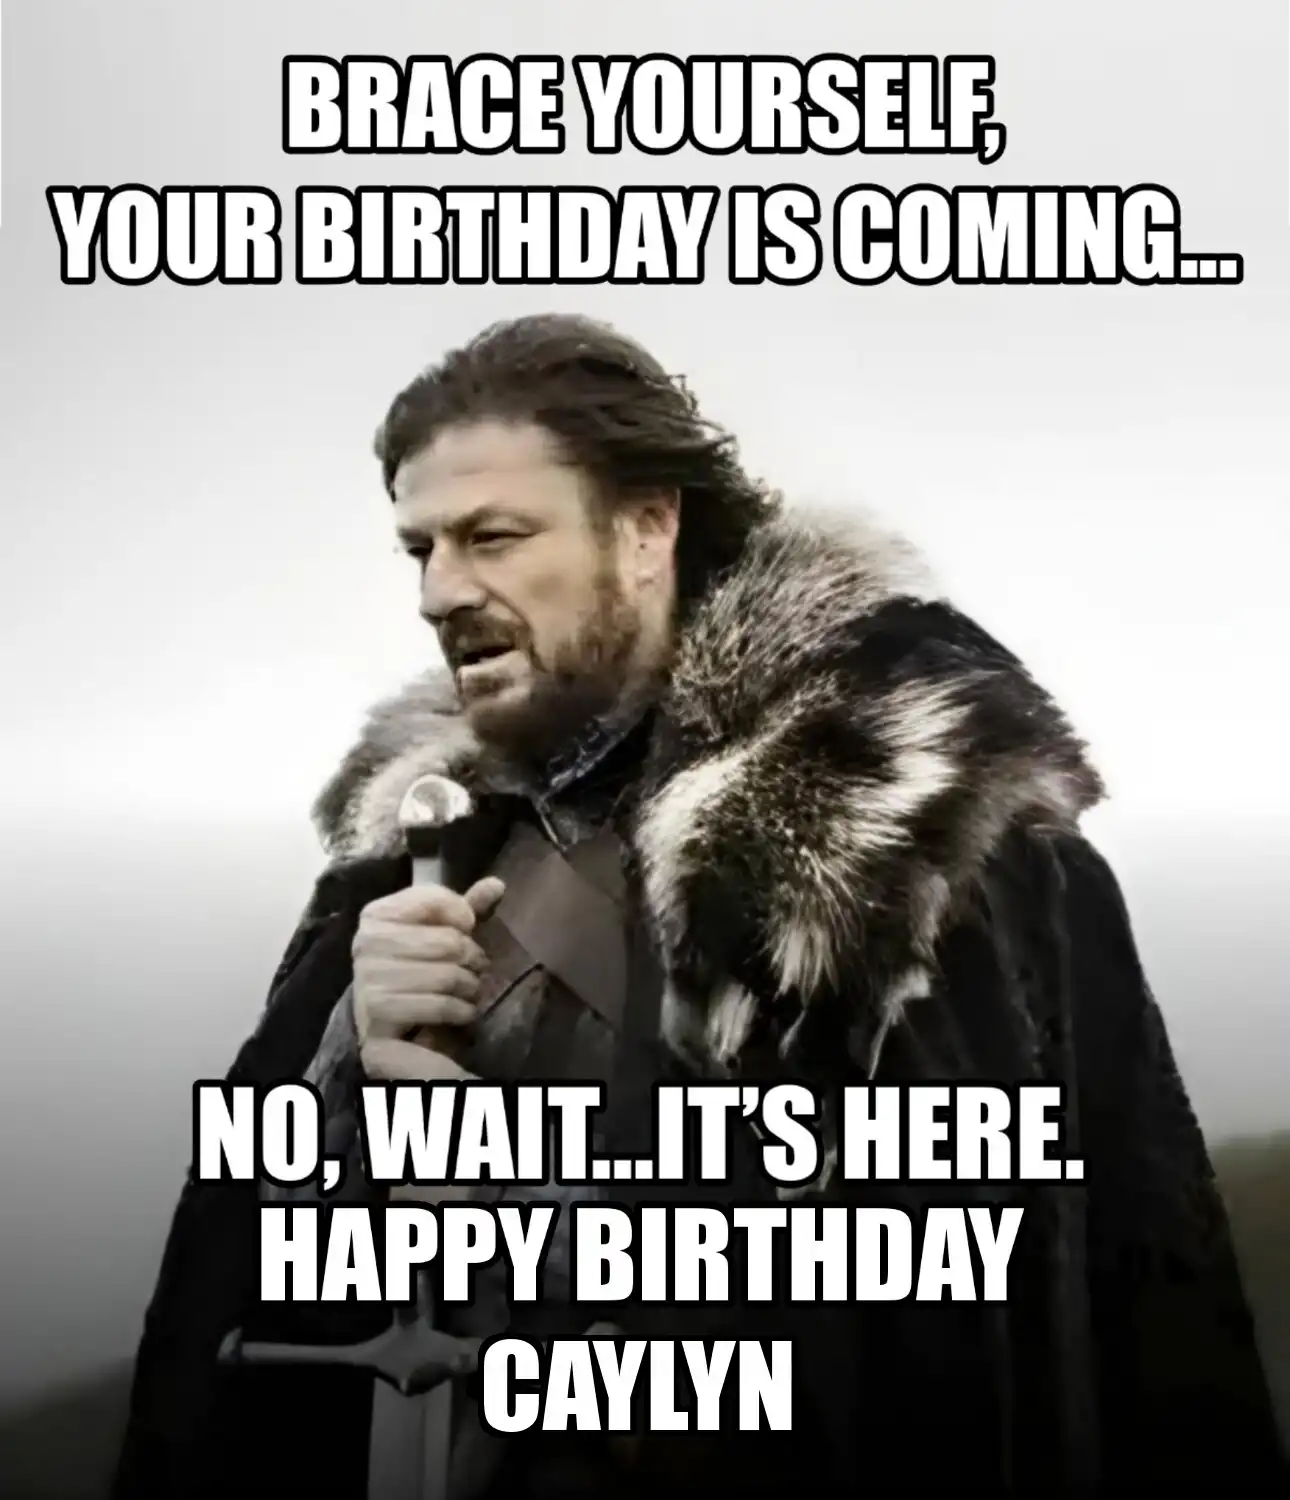 Happy Birthday Caylyn Brace Yourself Your Birthday Is Coming Meme